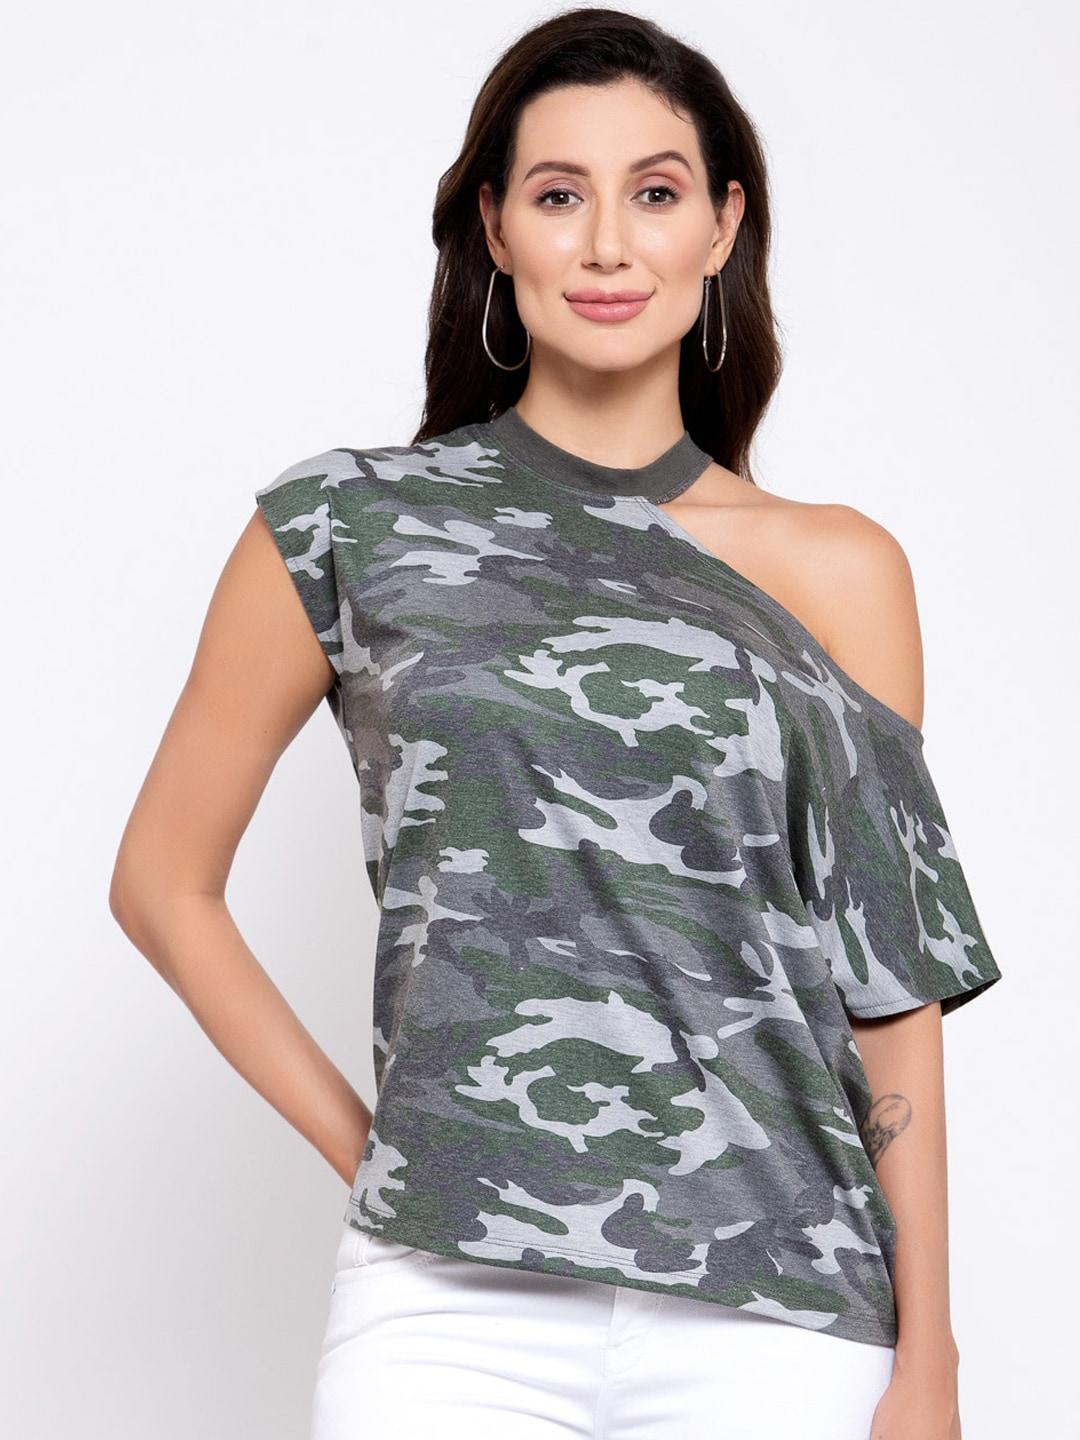 iki chic Green Camouflage Print Cutout Shoulder Top